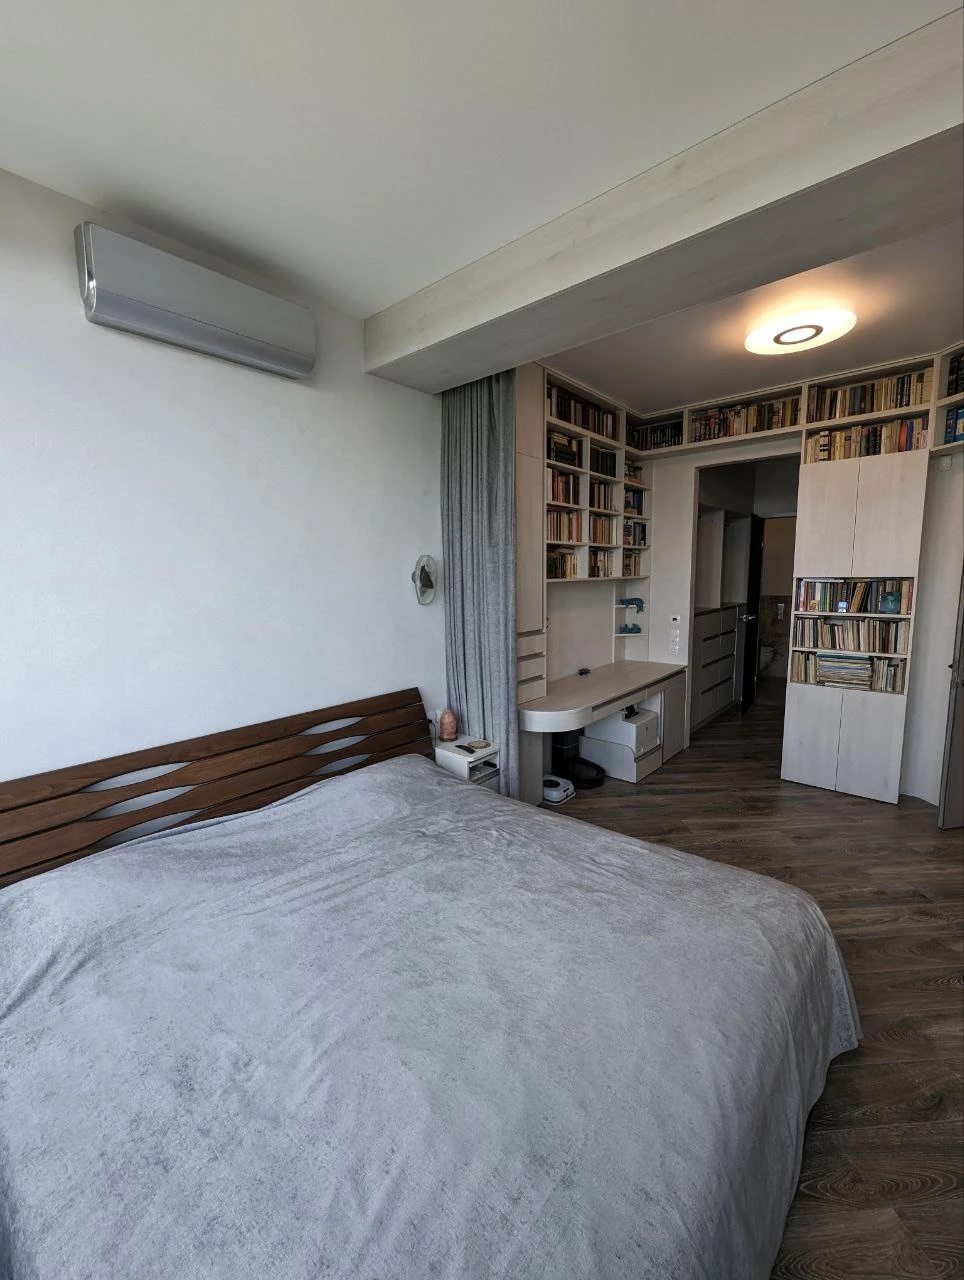 For sale 2-room apartment with author's renovation in the residential 